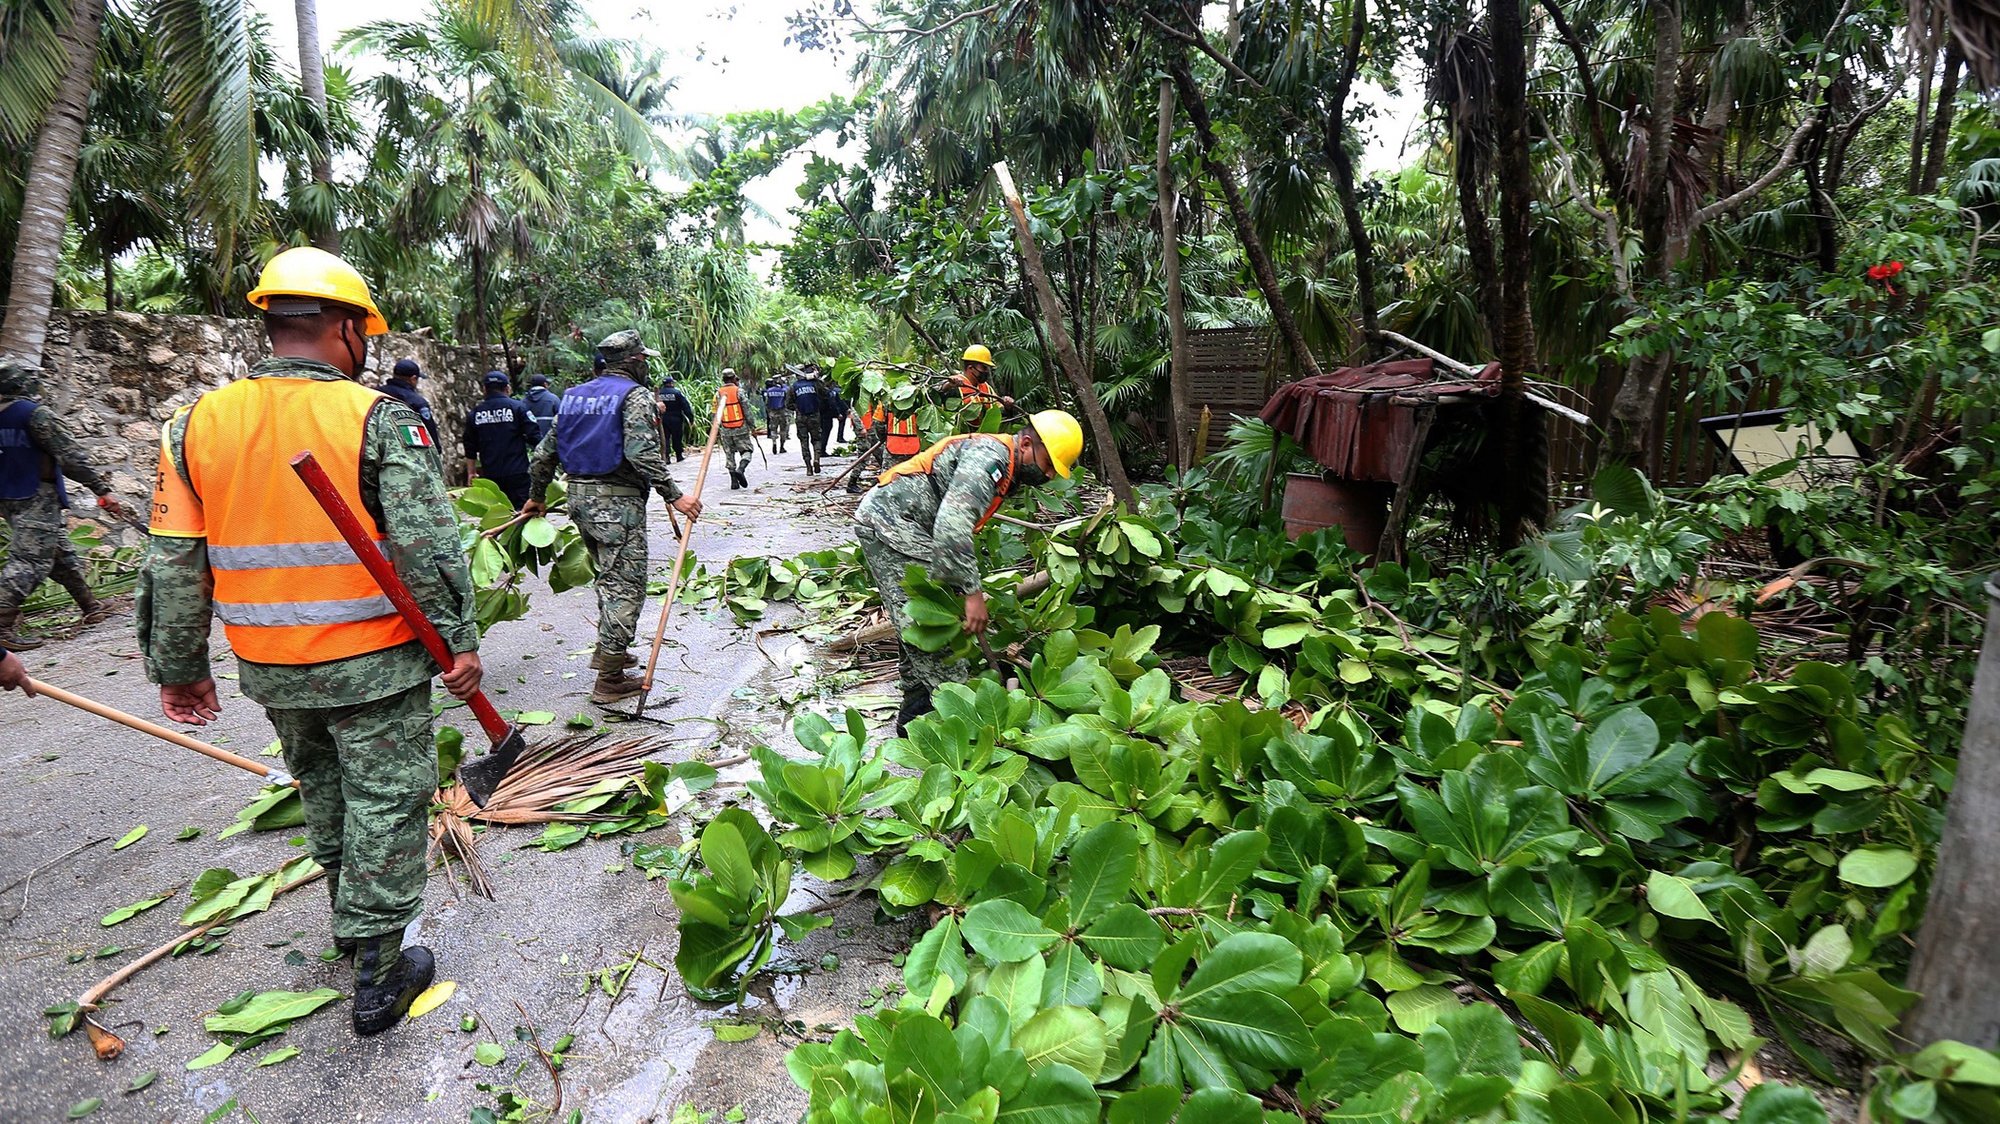 epa09421193 Members of the Mexican army walk by the areas affected by Hurricane Grace in Punta Allen, Quintana Roo state, Mexico, 19 August 2021. Hurricane Grace made landfall in the Mexican Caribbean, through the municipality of Tulum, bringing heavy rains.  EPA/Alonso Cupul